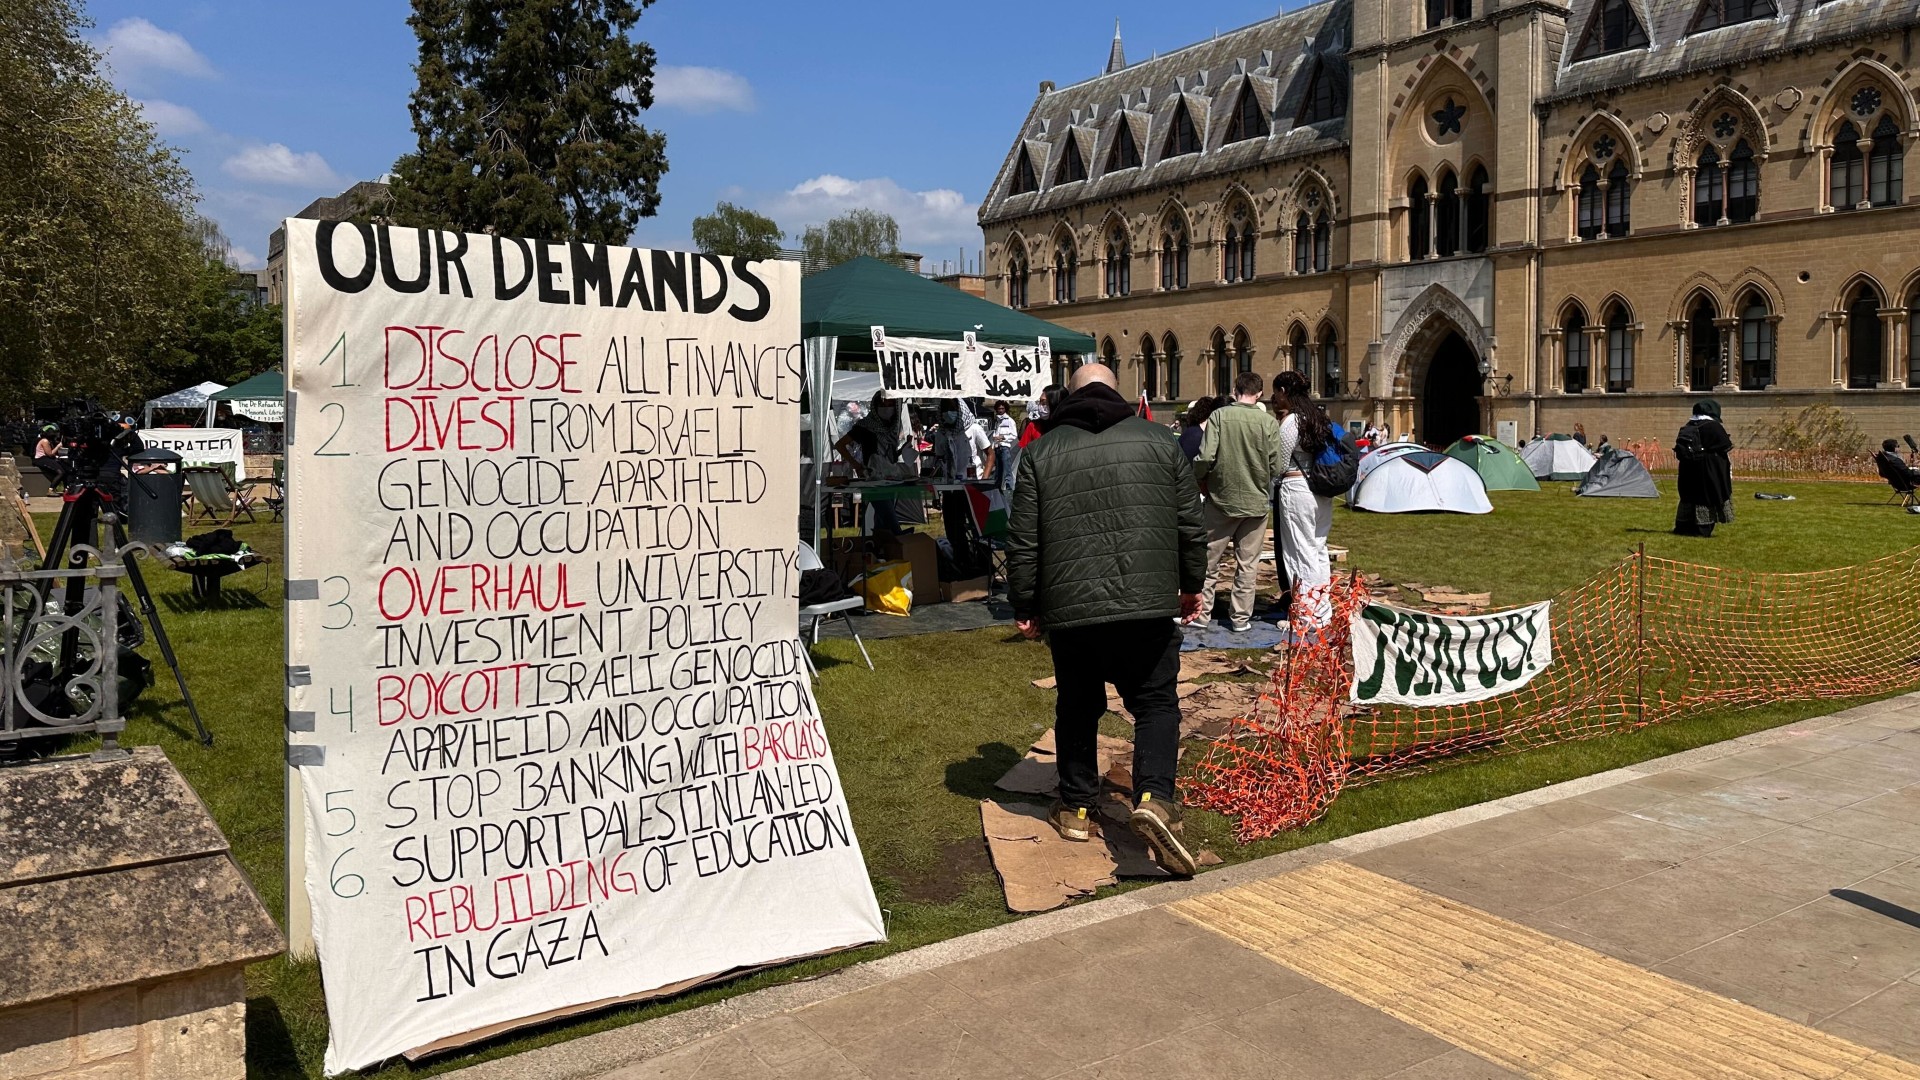 List of demands by the Oxford encampments for Gaza (MEE)